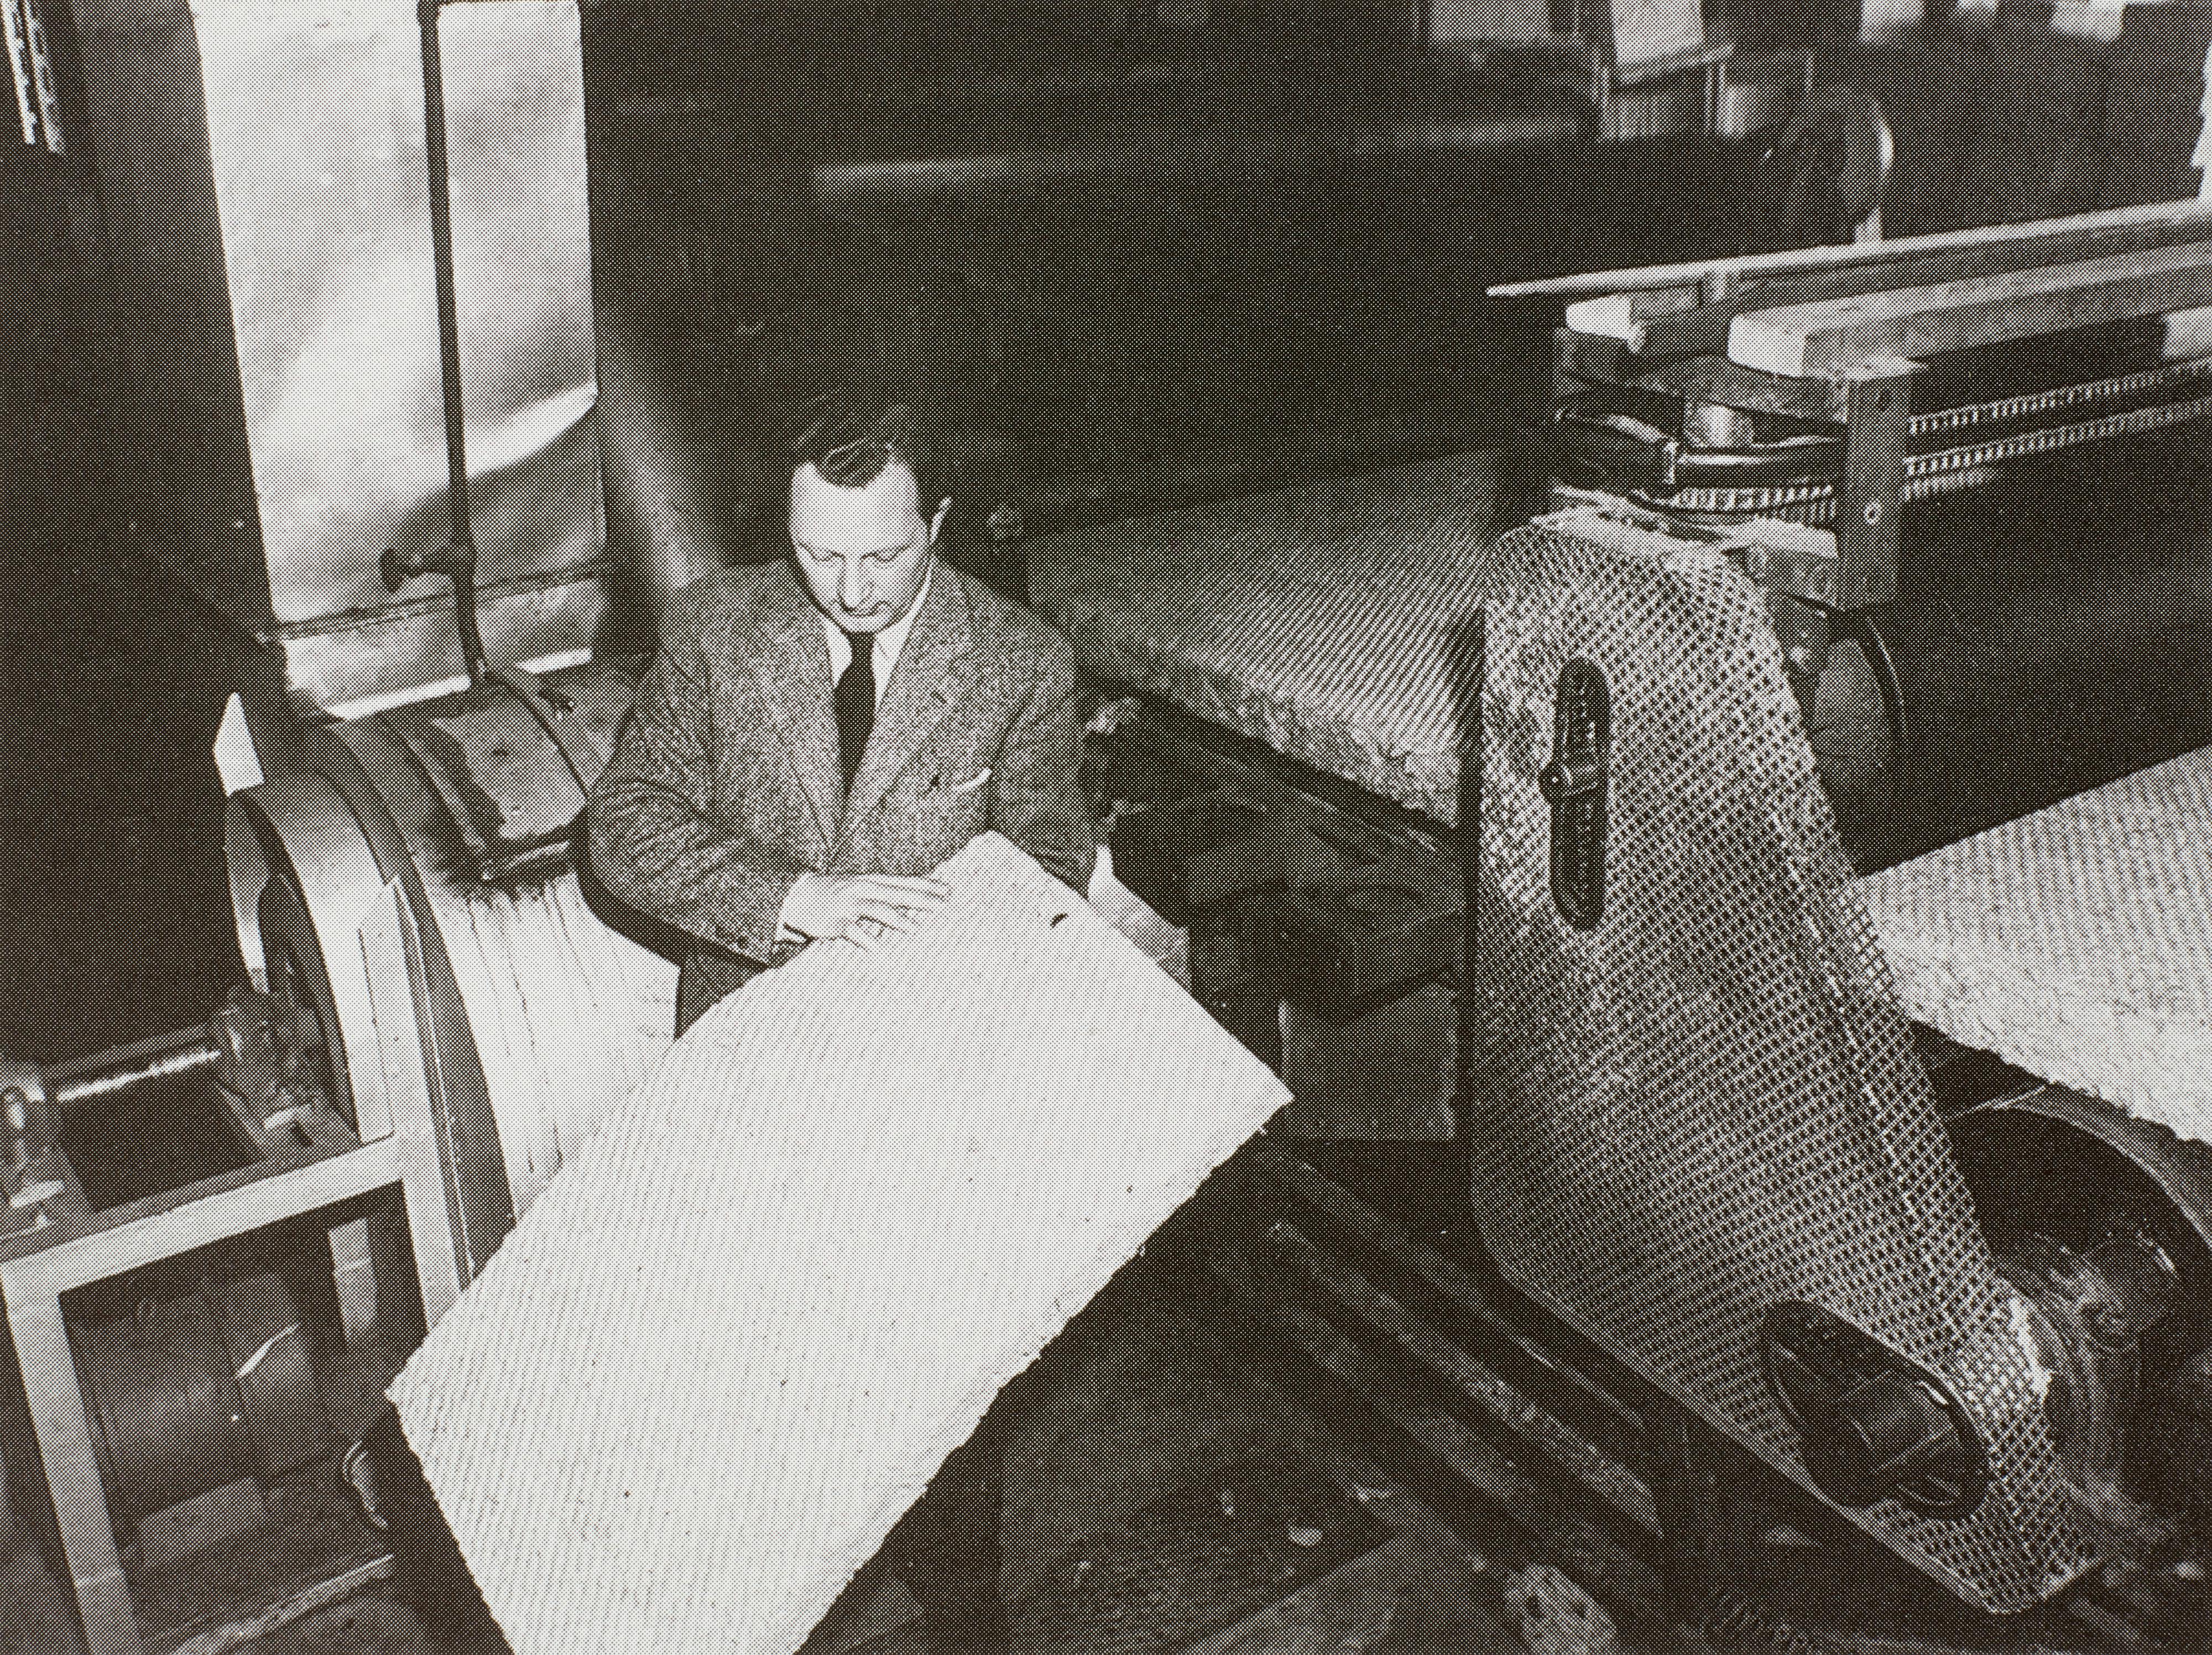 Verner Palmqvist - started in 1941 at the age of 24 as an electrician and retired 44 years later as Vice President of Research & Development. The photo shows him next to one of the productions lines in Hedehusene ind 1958.